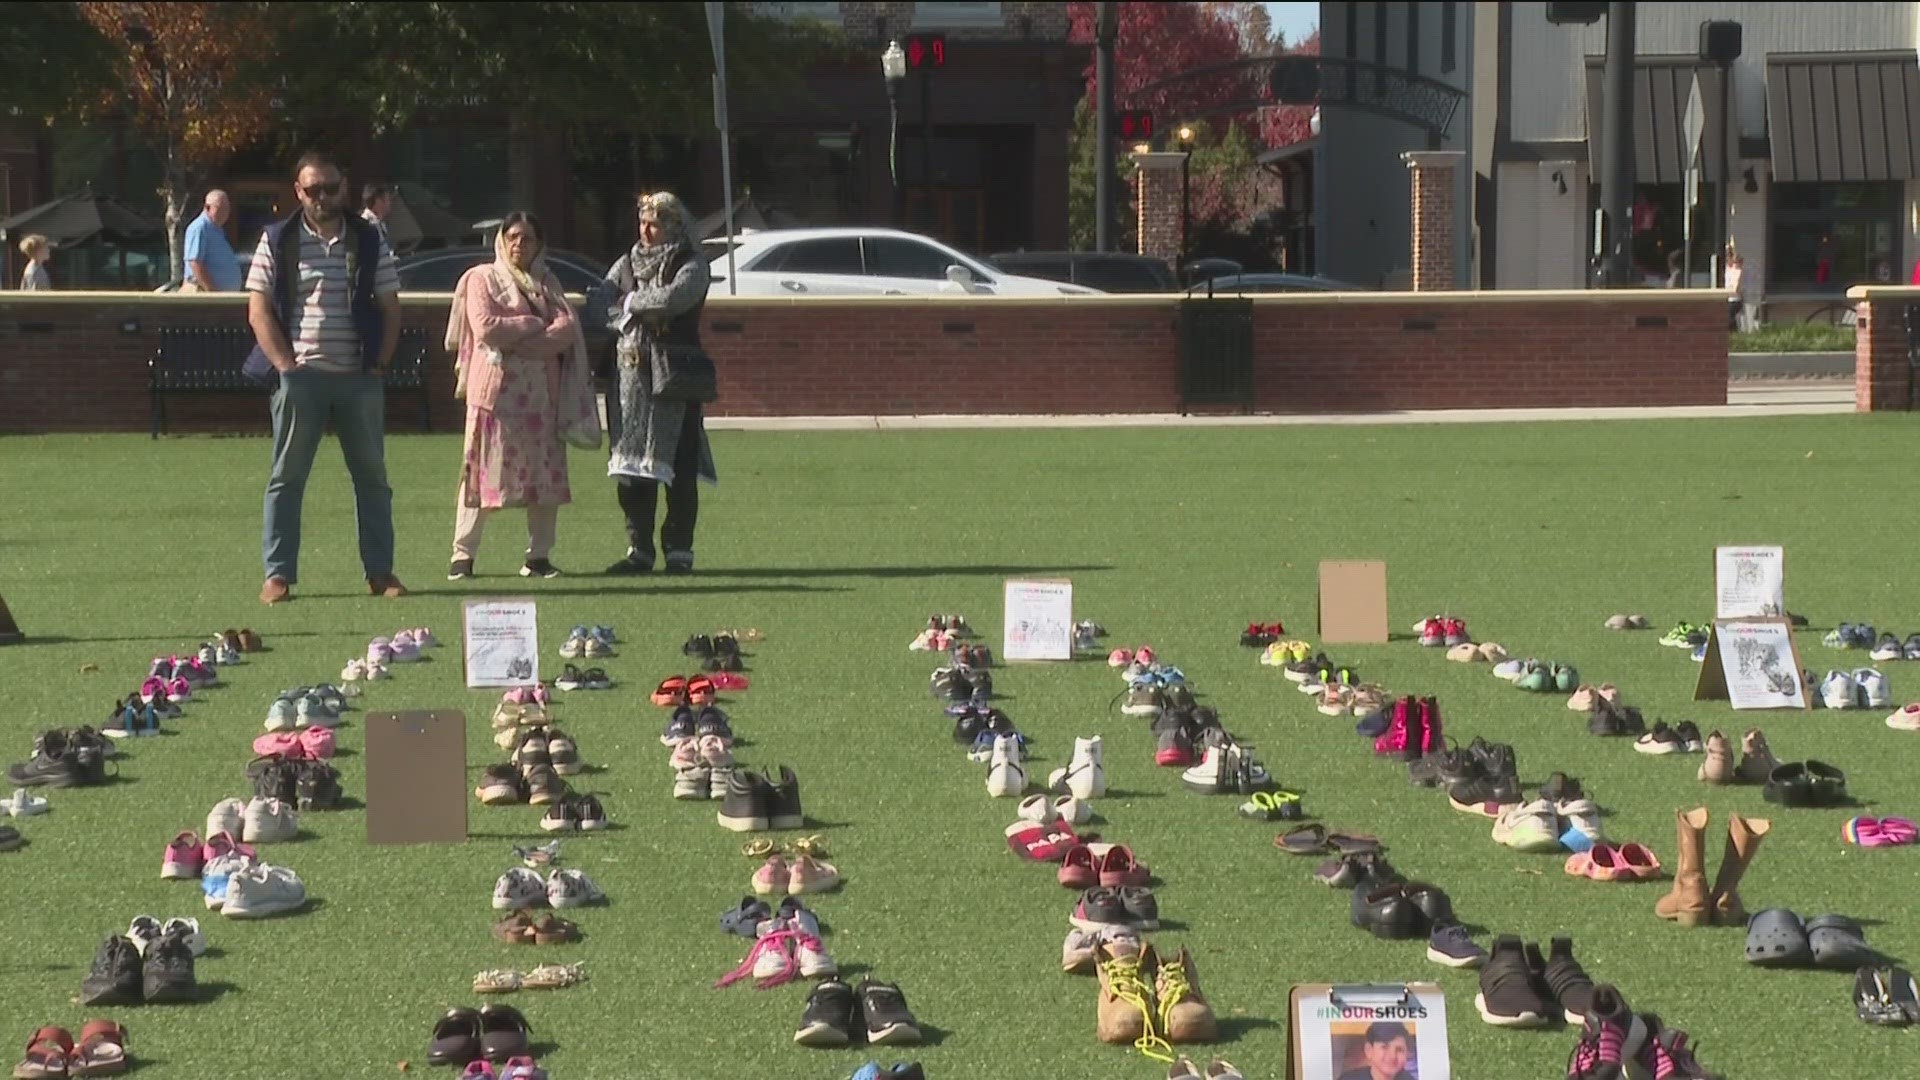 Hundreds of shoes representing thousands of children killed in Gaza region were displayed in Downtown Alpharetta town square.